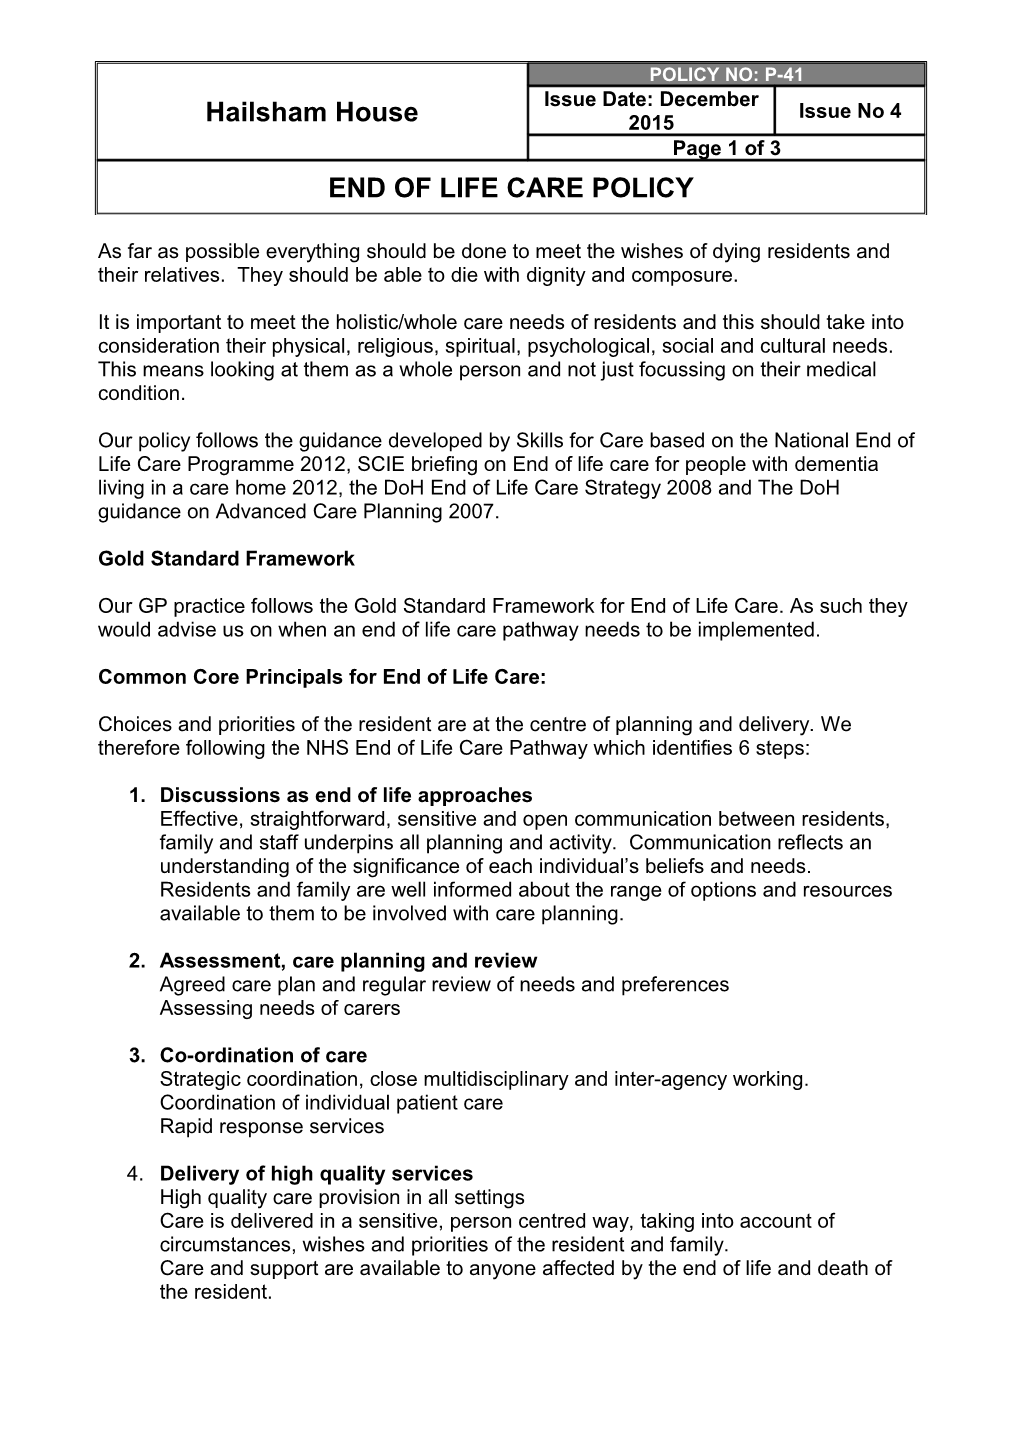 Common Core Principals for End of Life Care